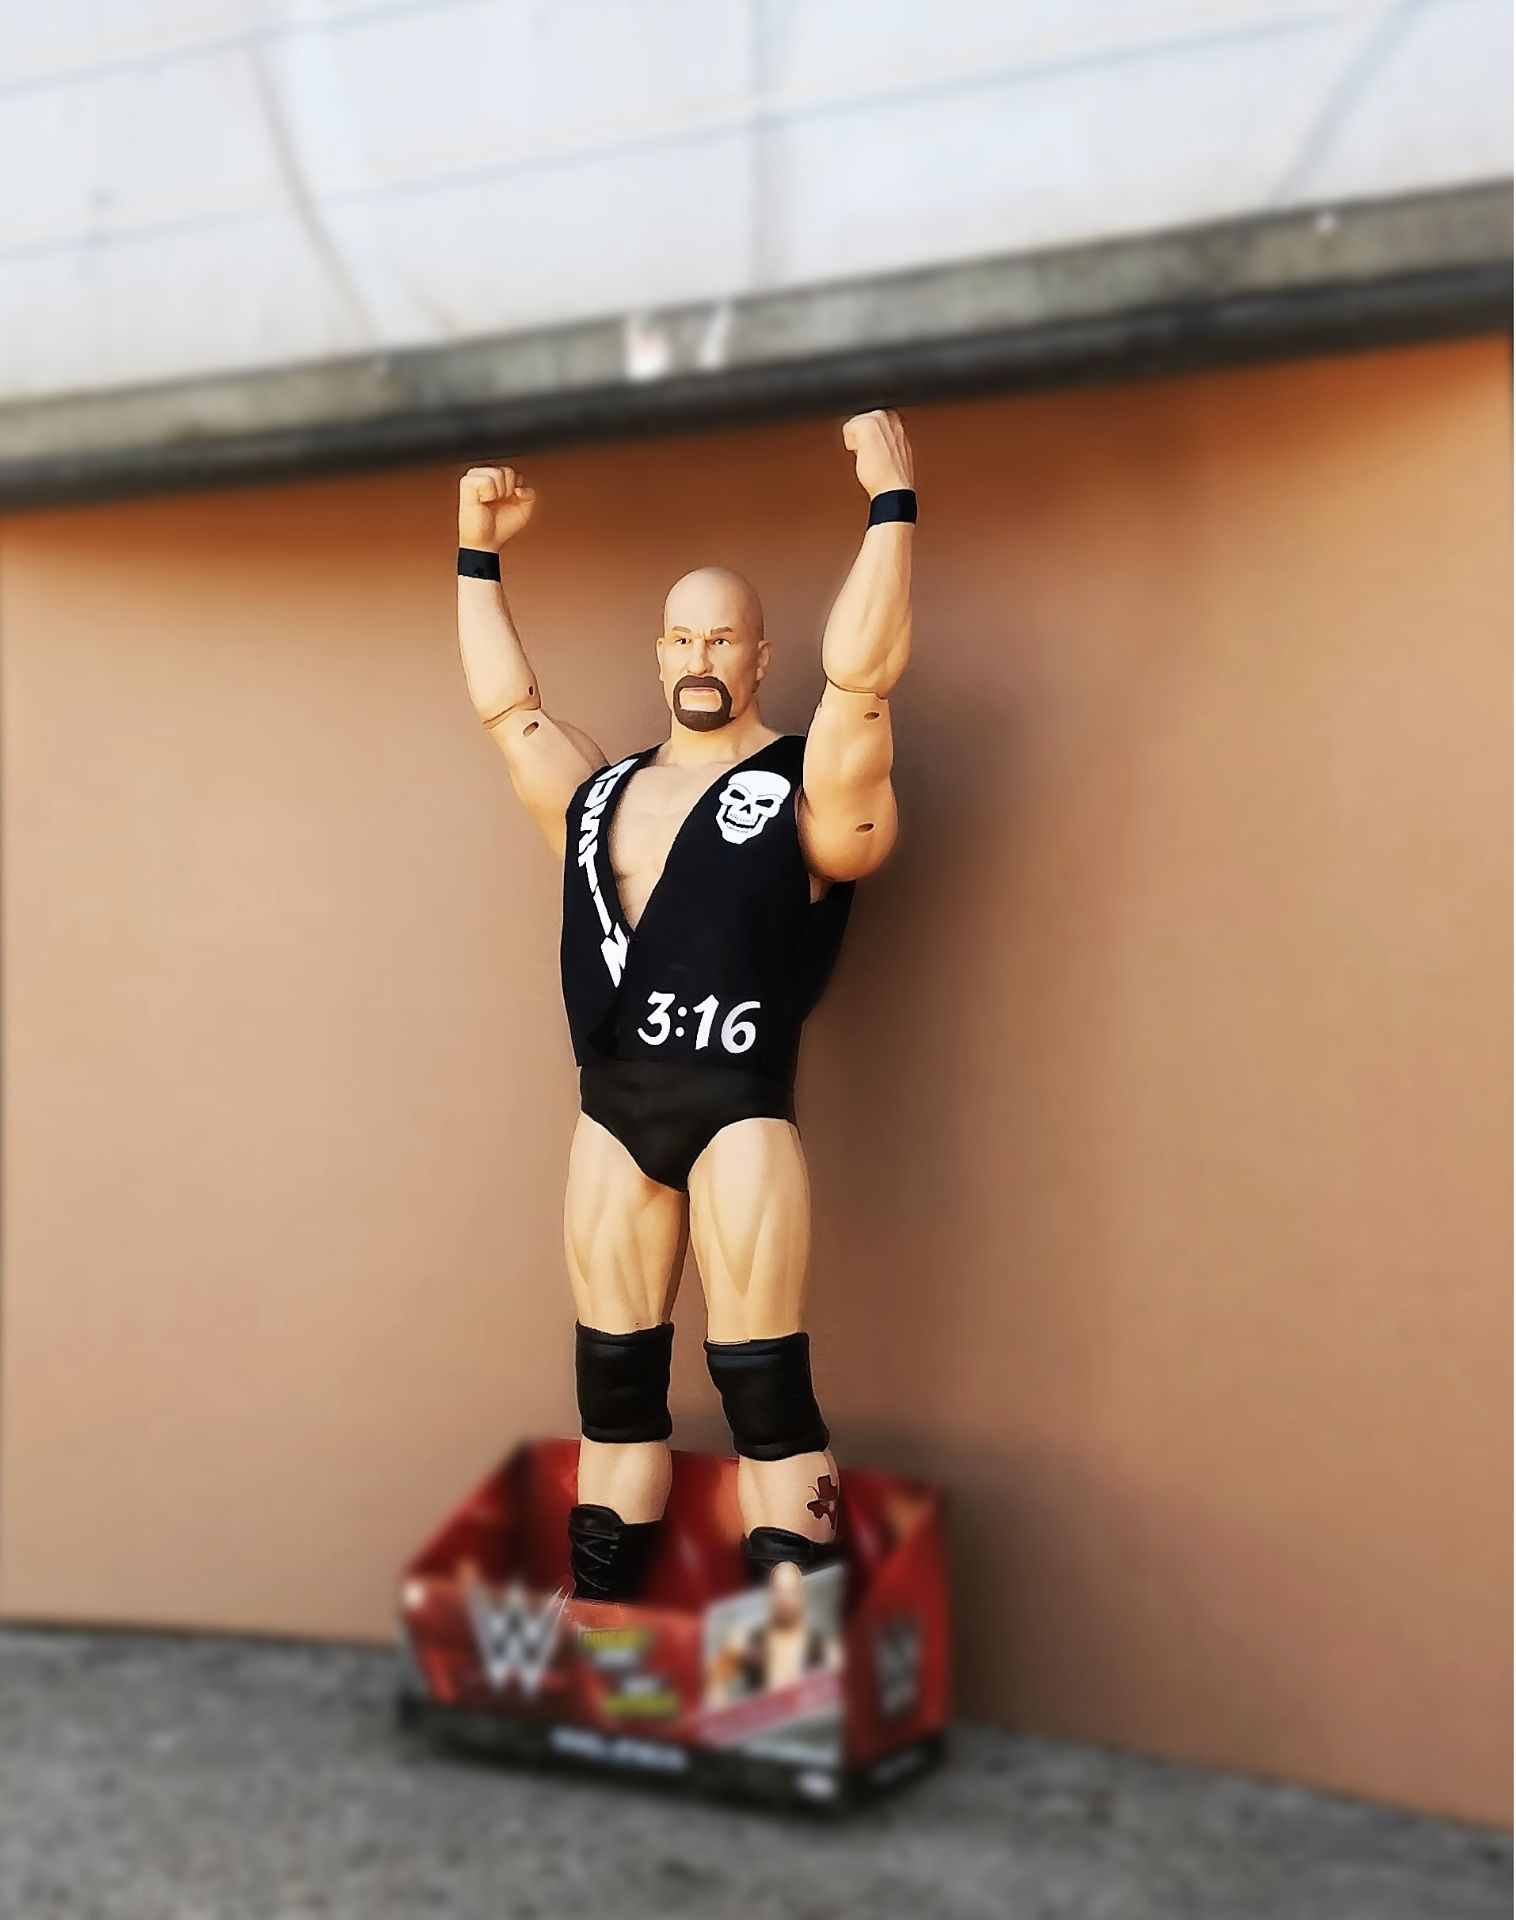 V Brand New Massive 31" WWE Stone Cold Steve Austin Action Figures - 3count.co.uk Price £28.99 - 8 - Image 8 of 8